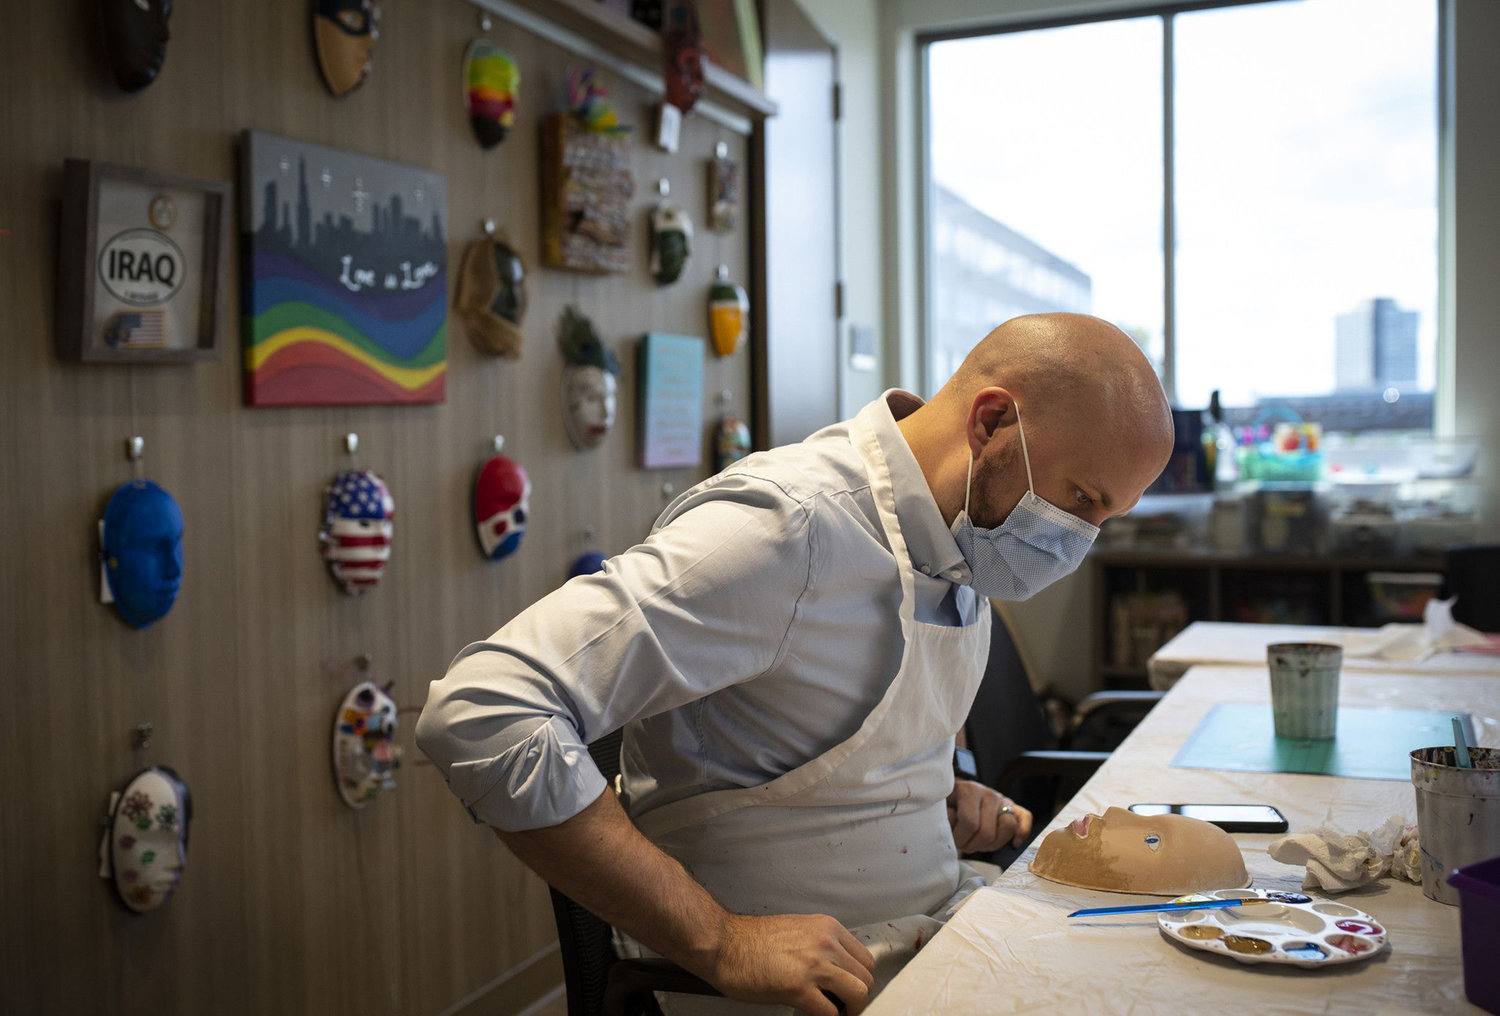 Jarrett Langfitt, a therapist with the Road Home Program who served five years in the army, paints a mask in an art therapy workshop on Sept. 9, 2021. (E. Jason Wambsgans/Chicago Tribune/TNS)